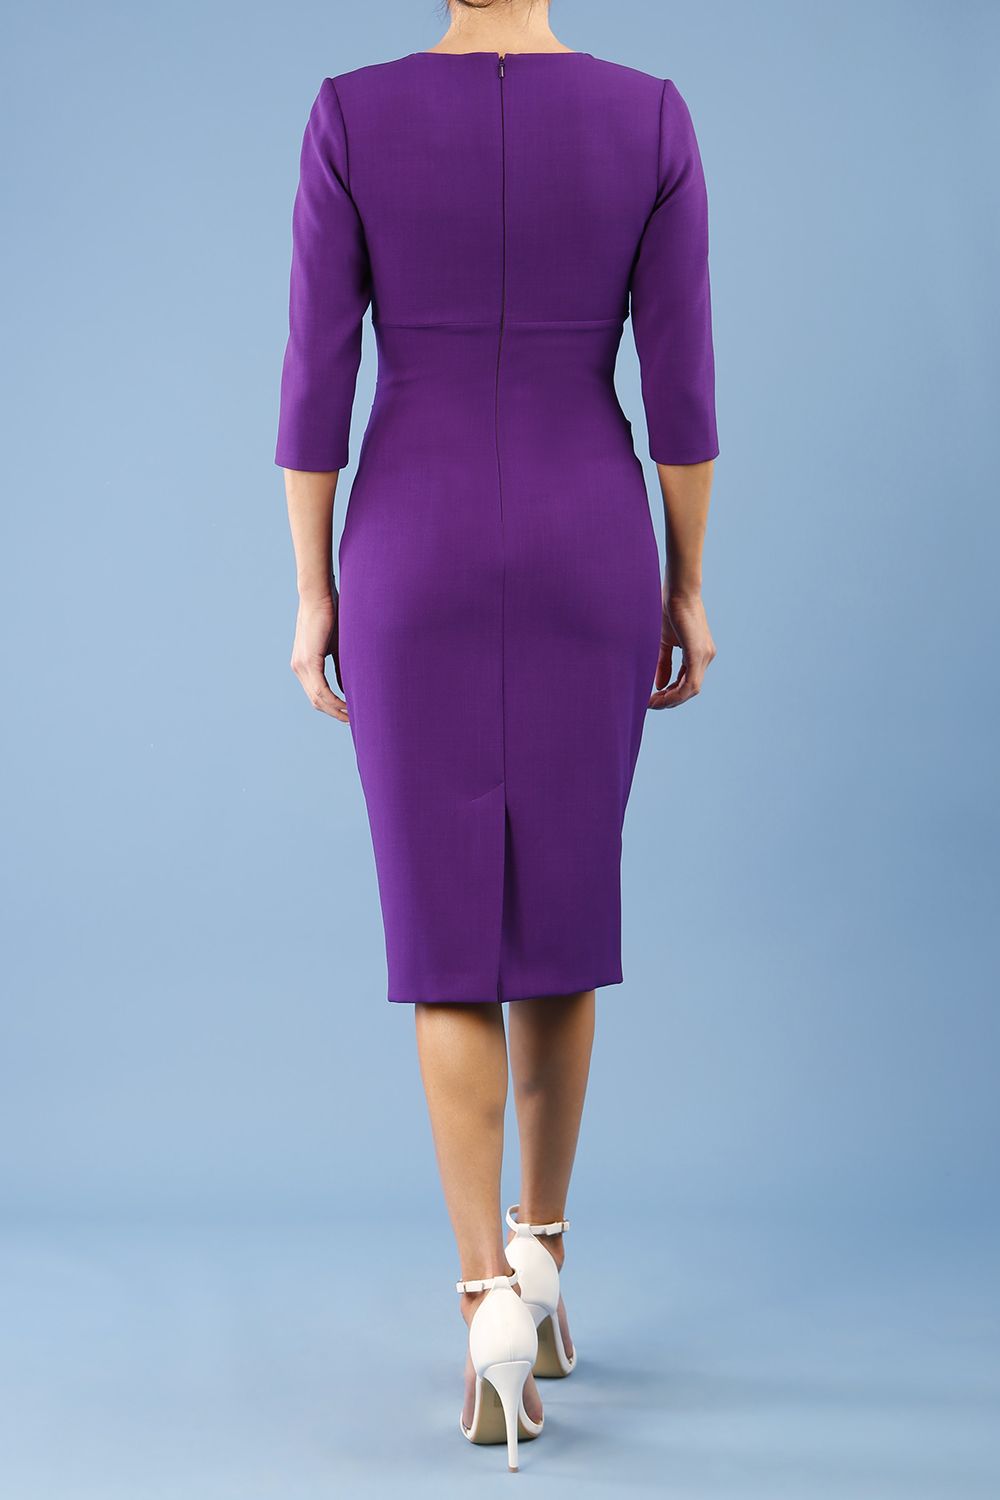 brunette model wearing diva catwalk ubrique pencil dress with a keyhole detail and sleeves in purple colour back